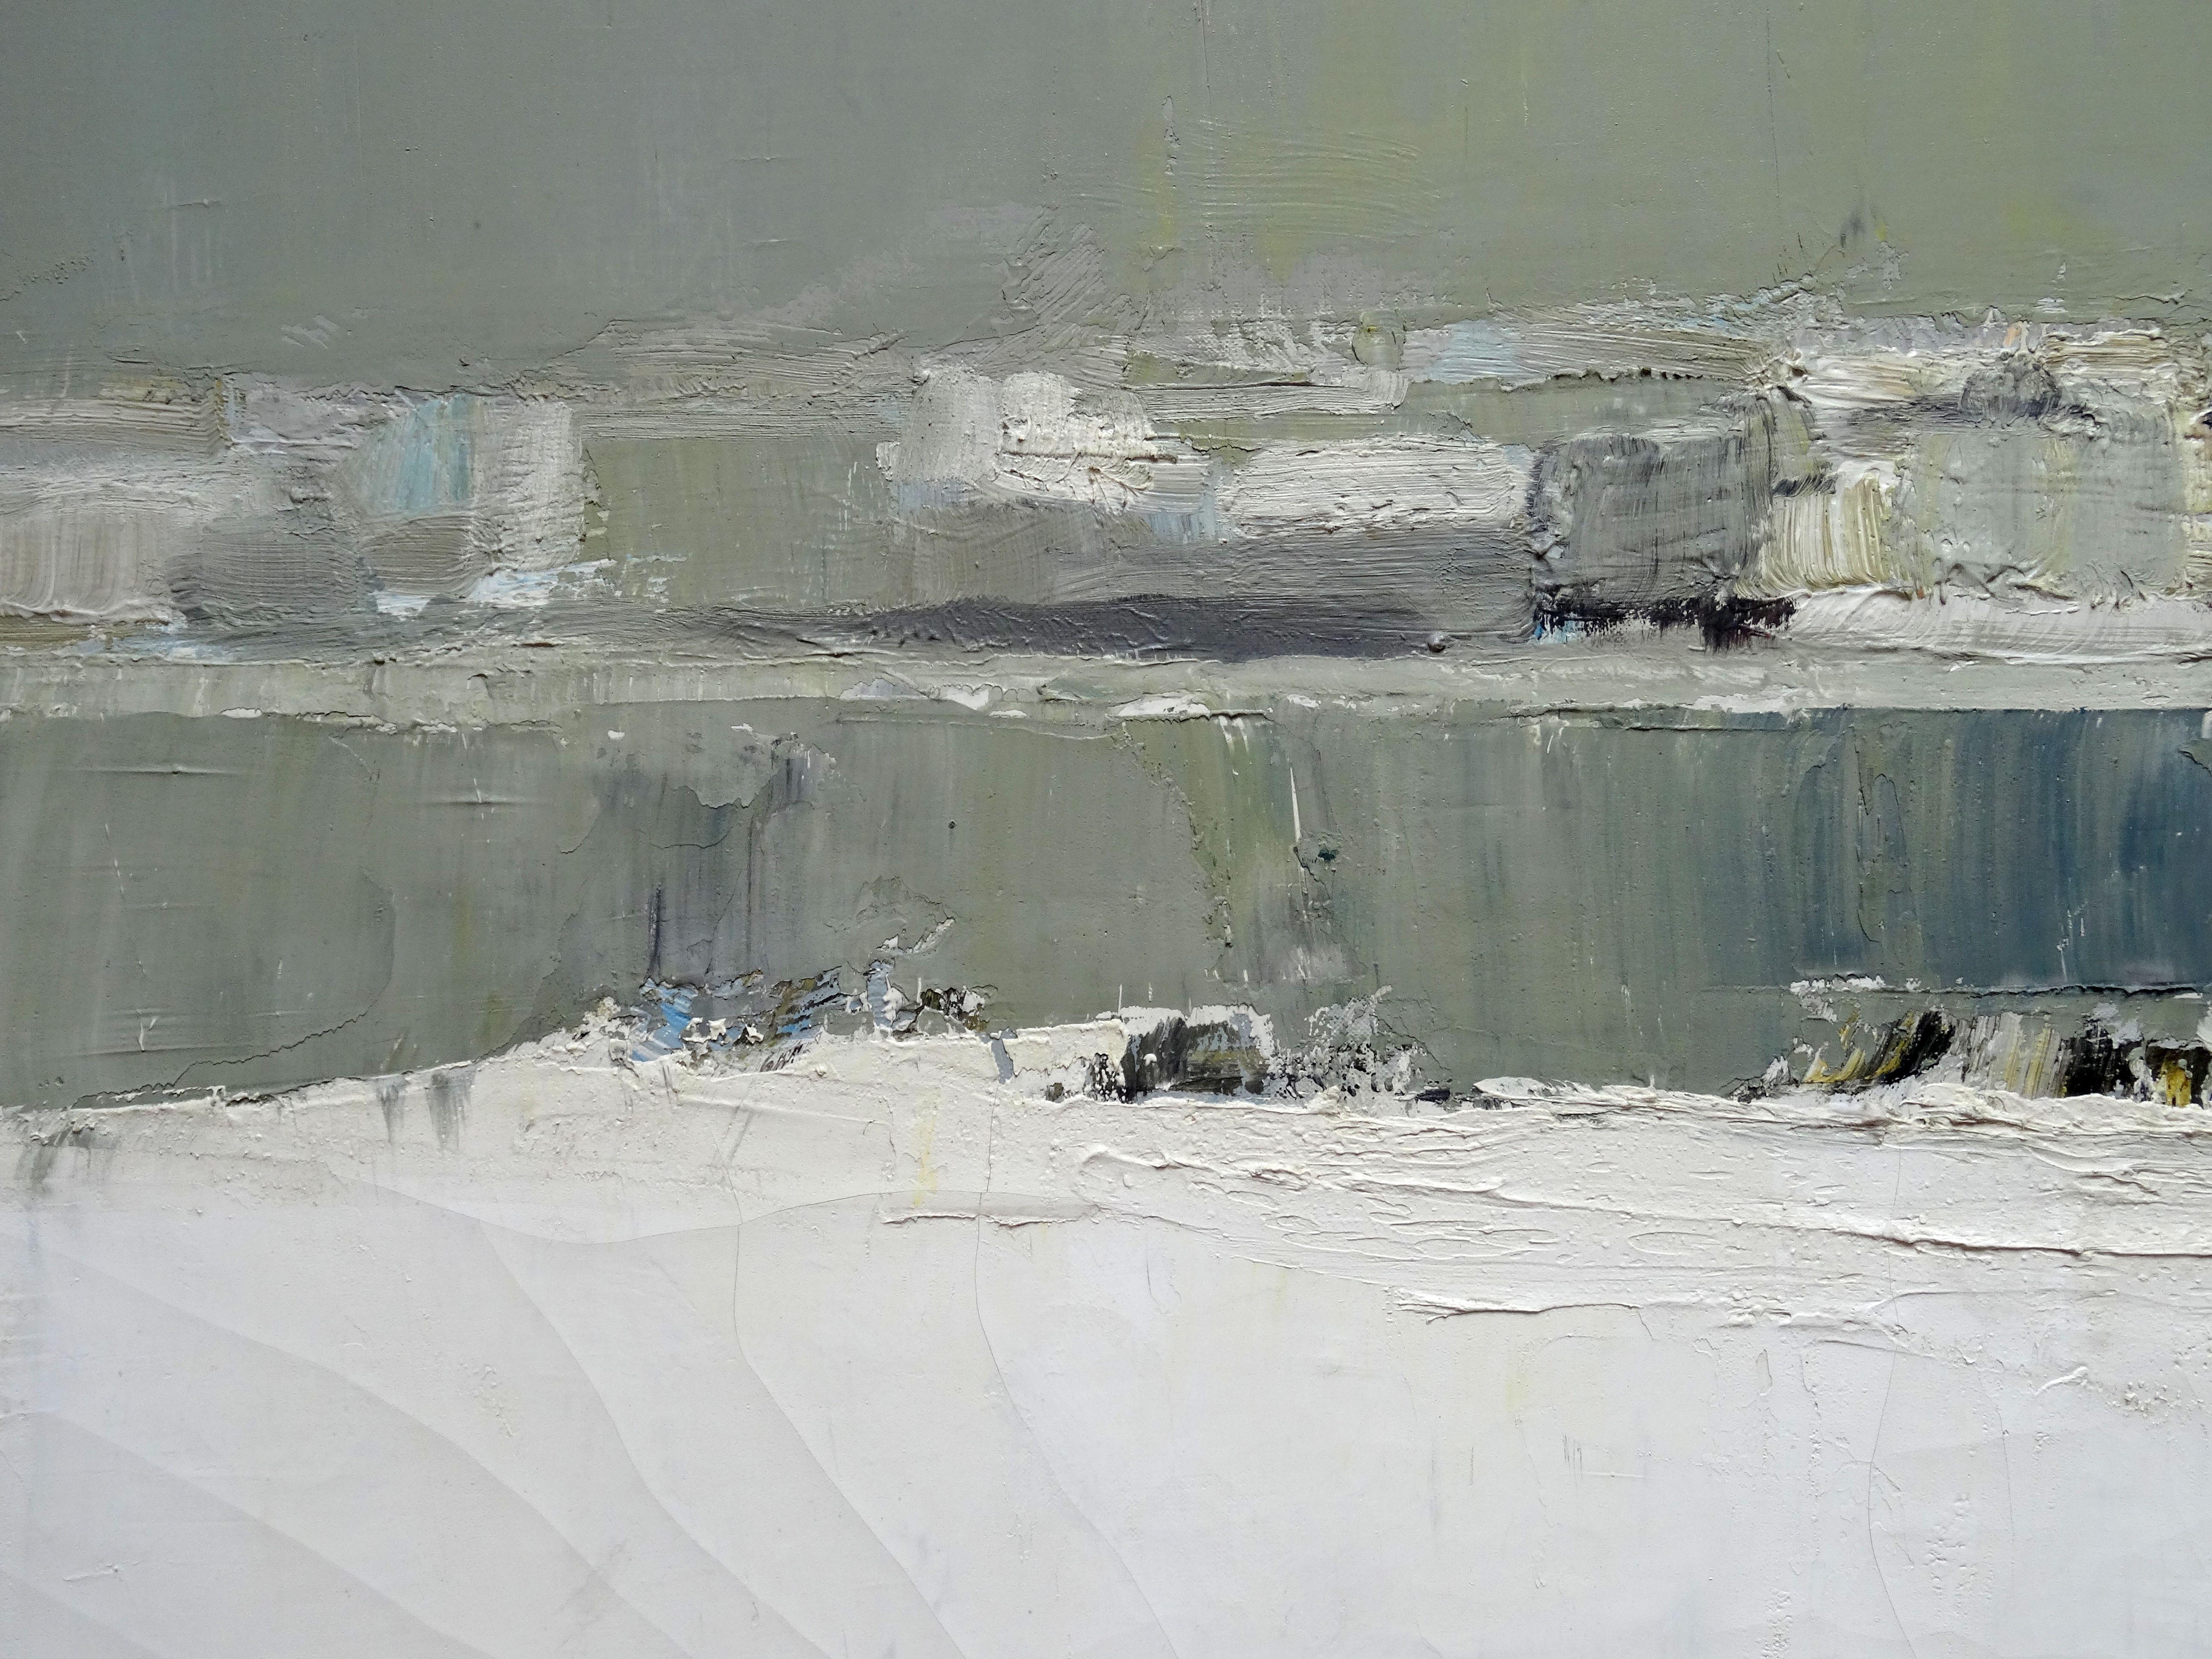 Paris. Banks of the Seine. 1961, oil on canvas, 60x81 cm - Gray Abstract Painting by Roger Mühl